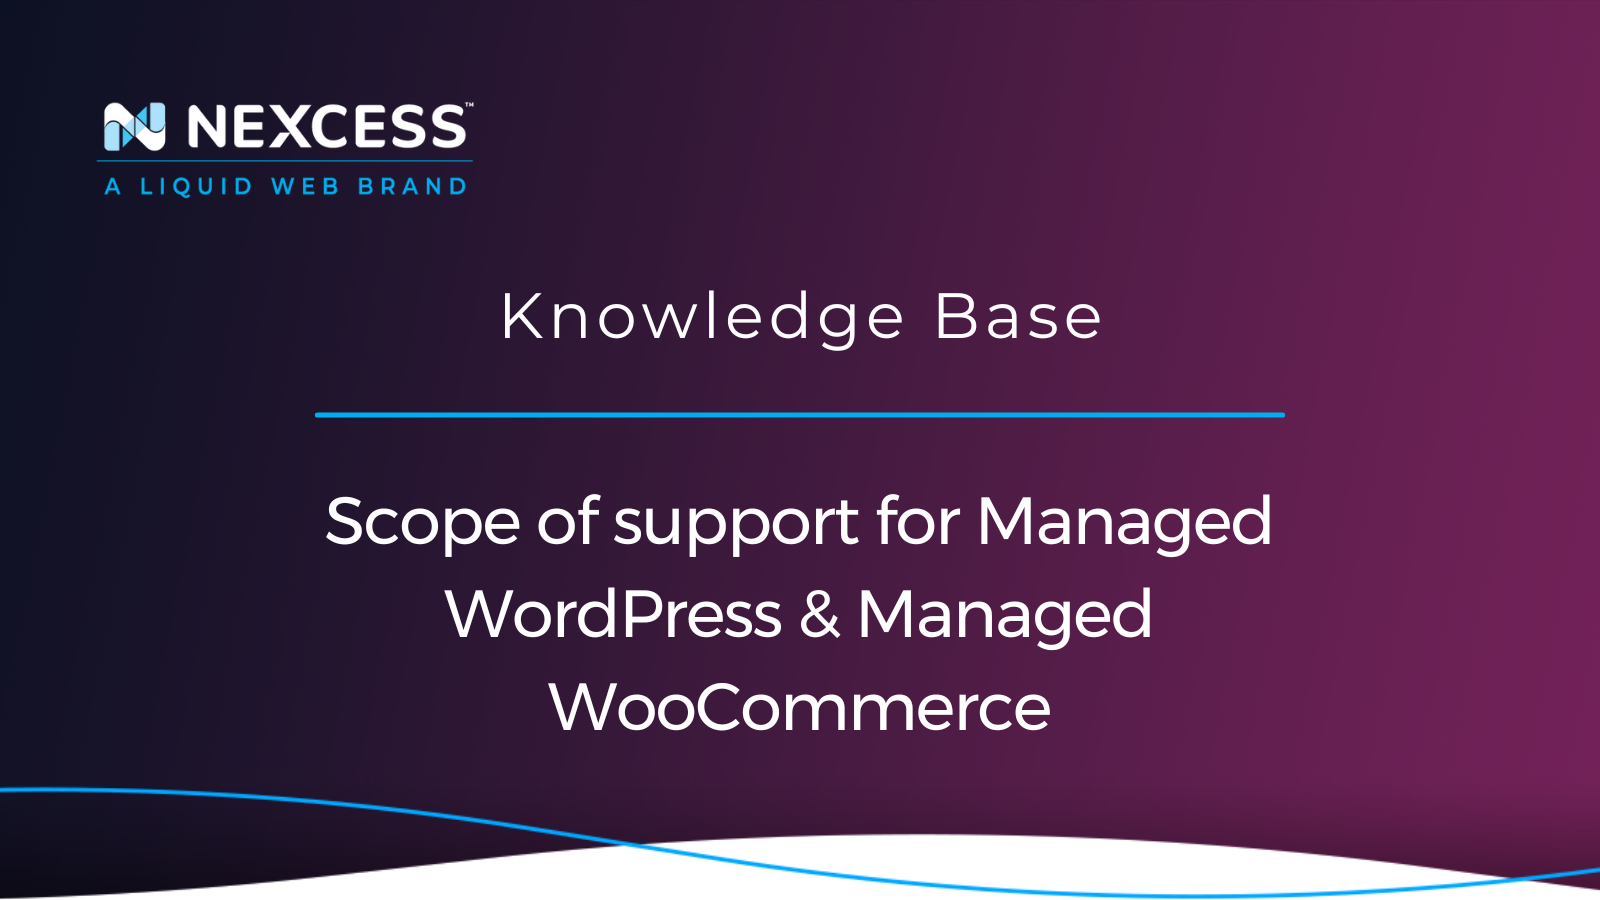 Scope of support for Managed WordPress & Managed WooCommerce